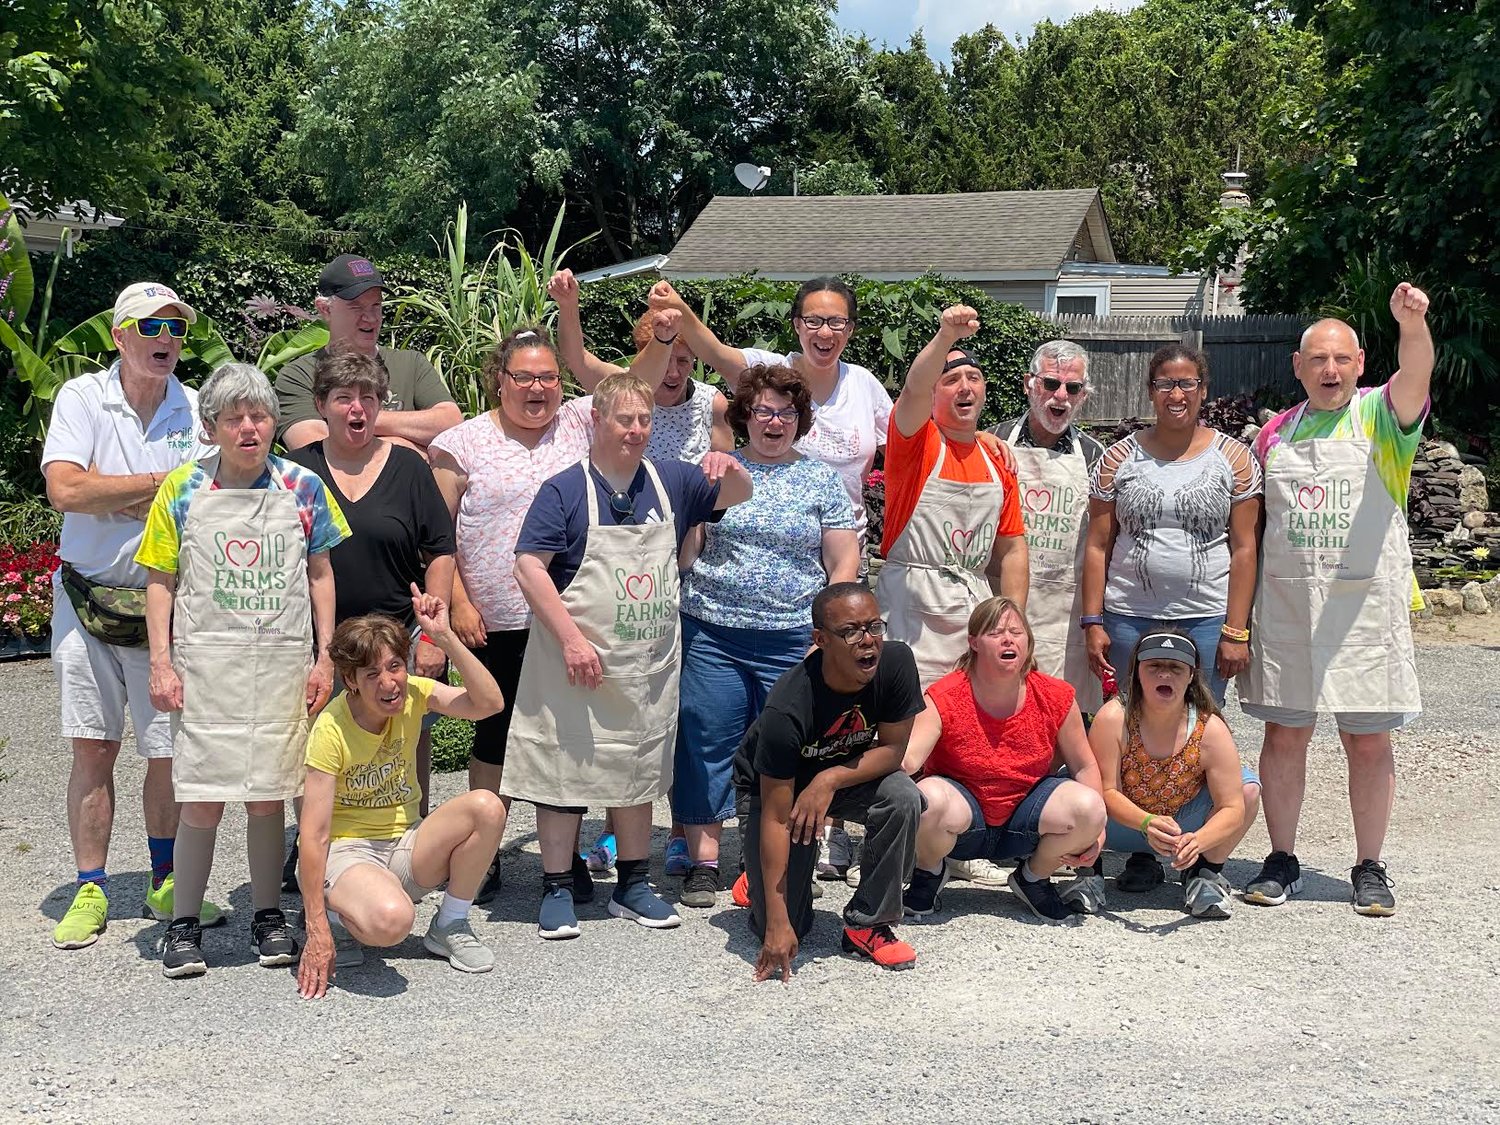 Their mission is to provide developmentally disabled adults with meaningful work opportunities at farms and urban gardens, greenhouses, and farm stands.